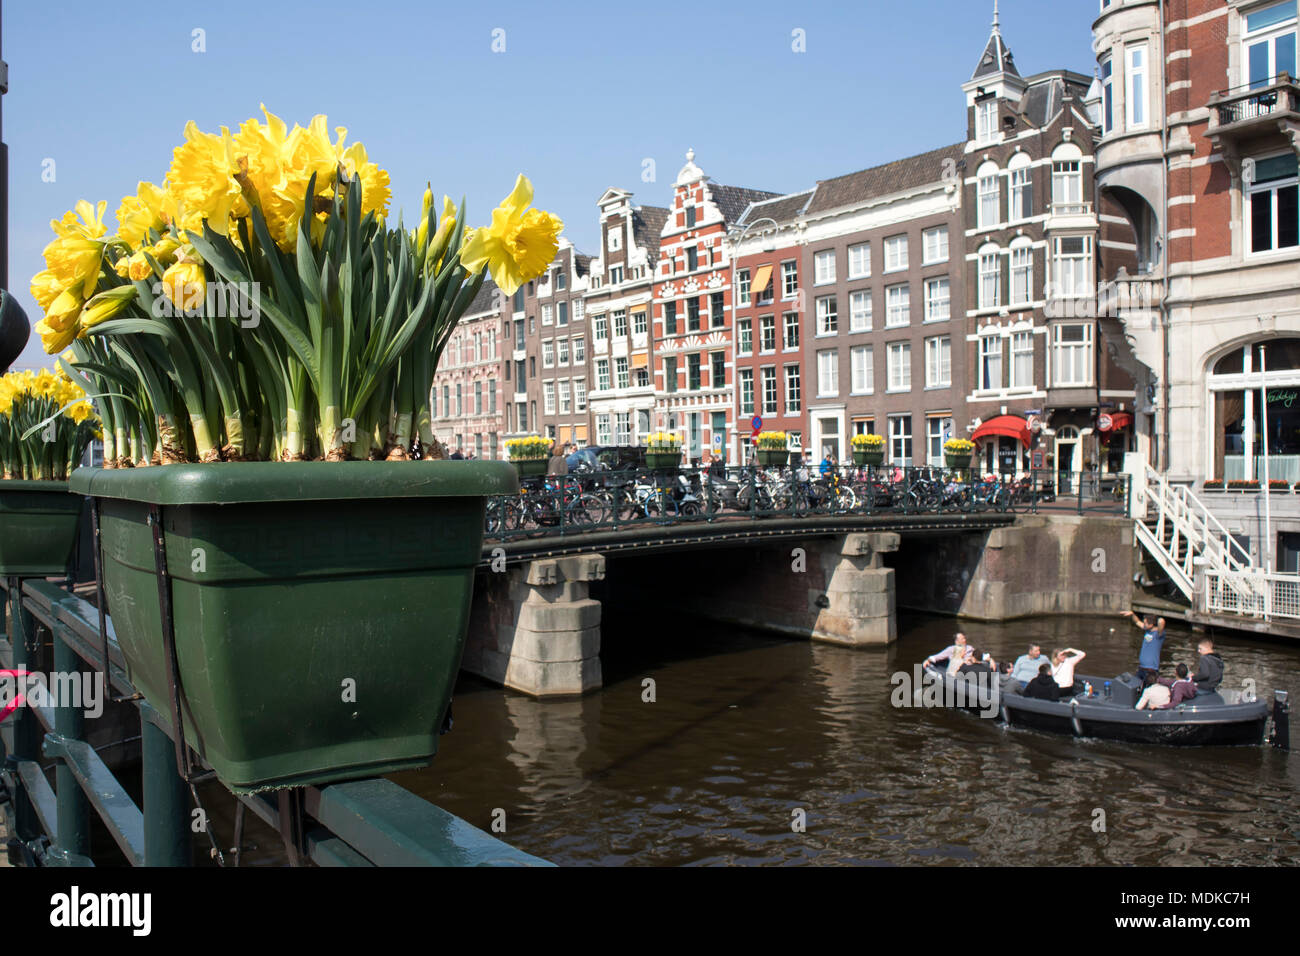 Amsterdam, Holland - 14 April 2018 The annual festival of spring flowers flowing in the streets of Amsterdam Stock Photo